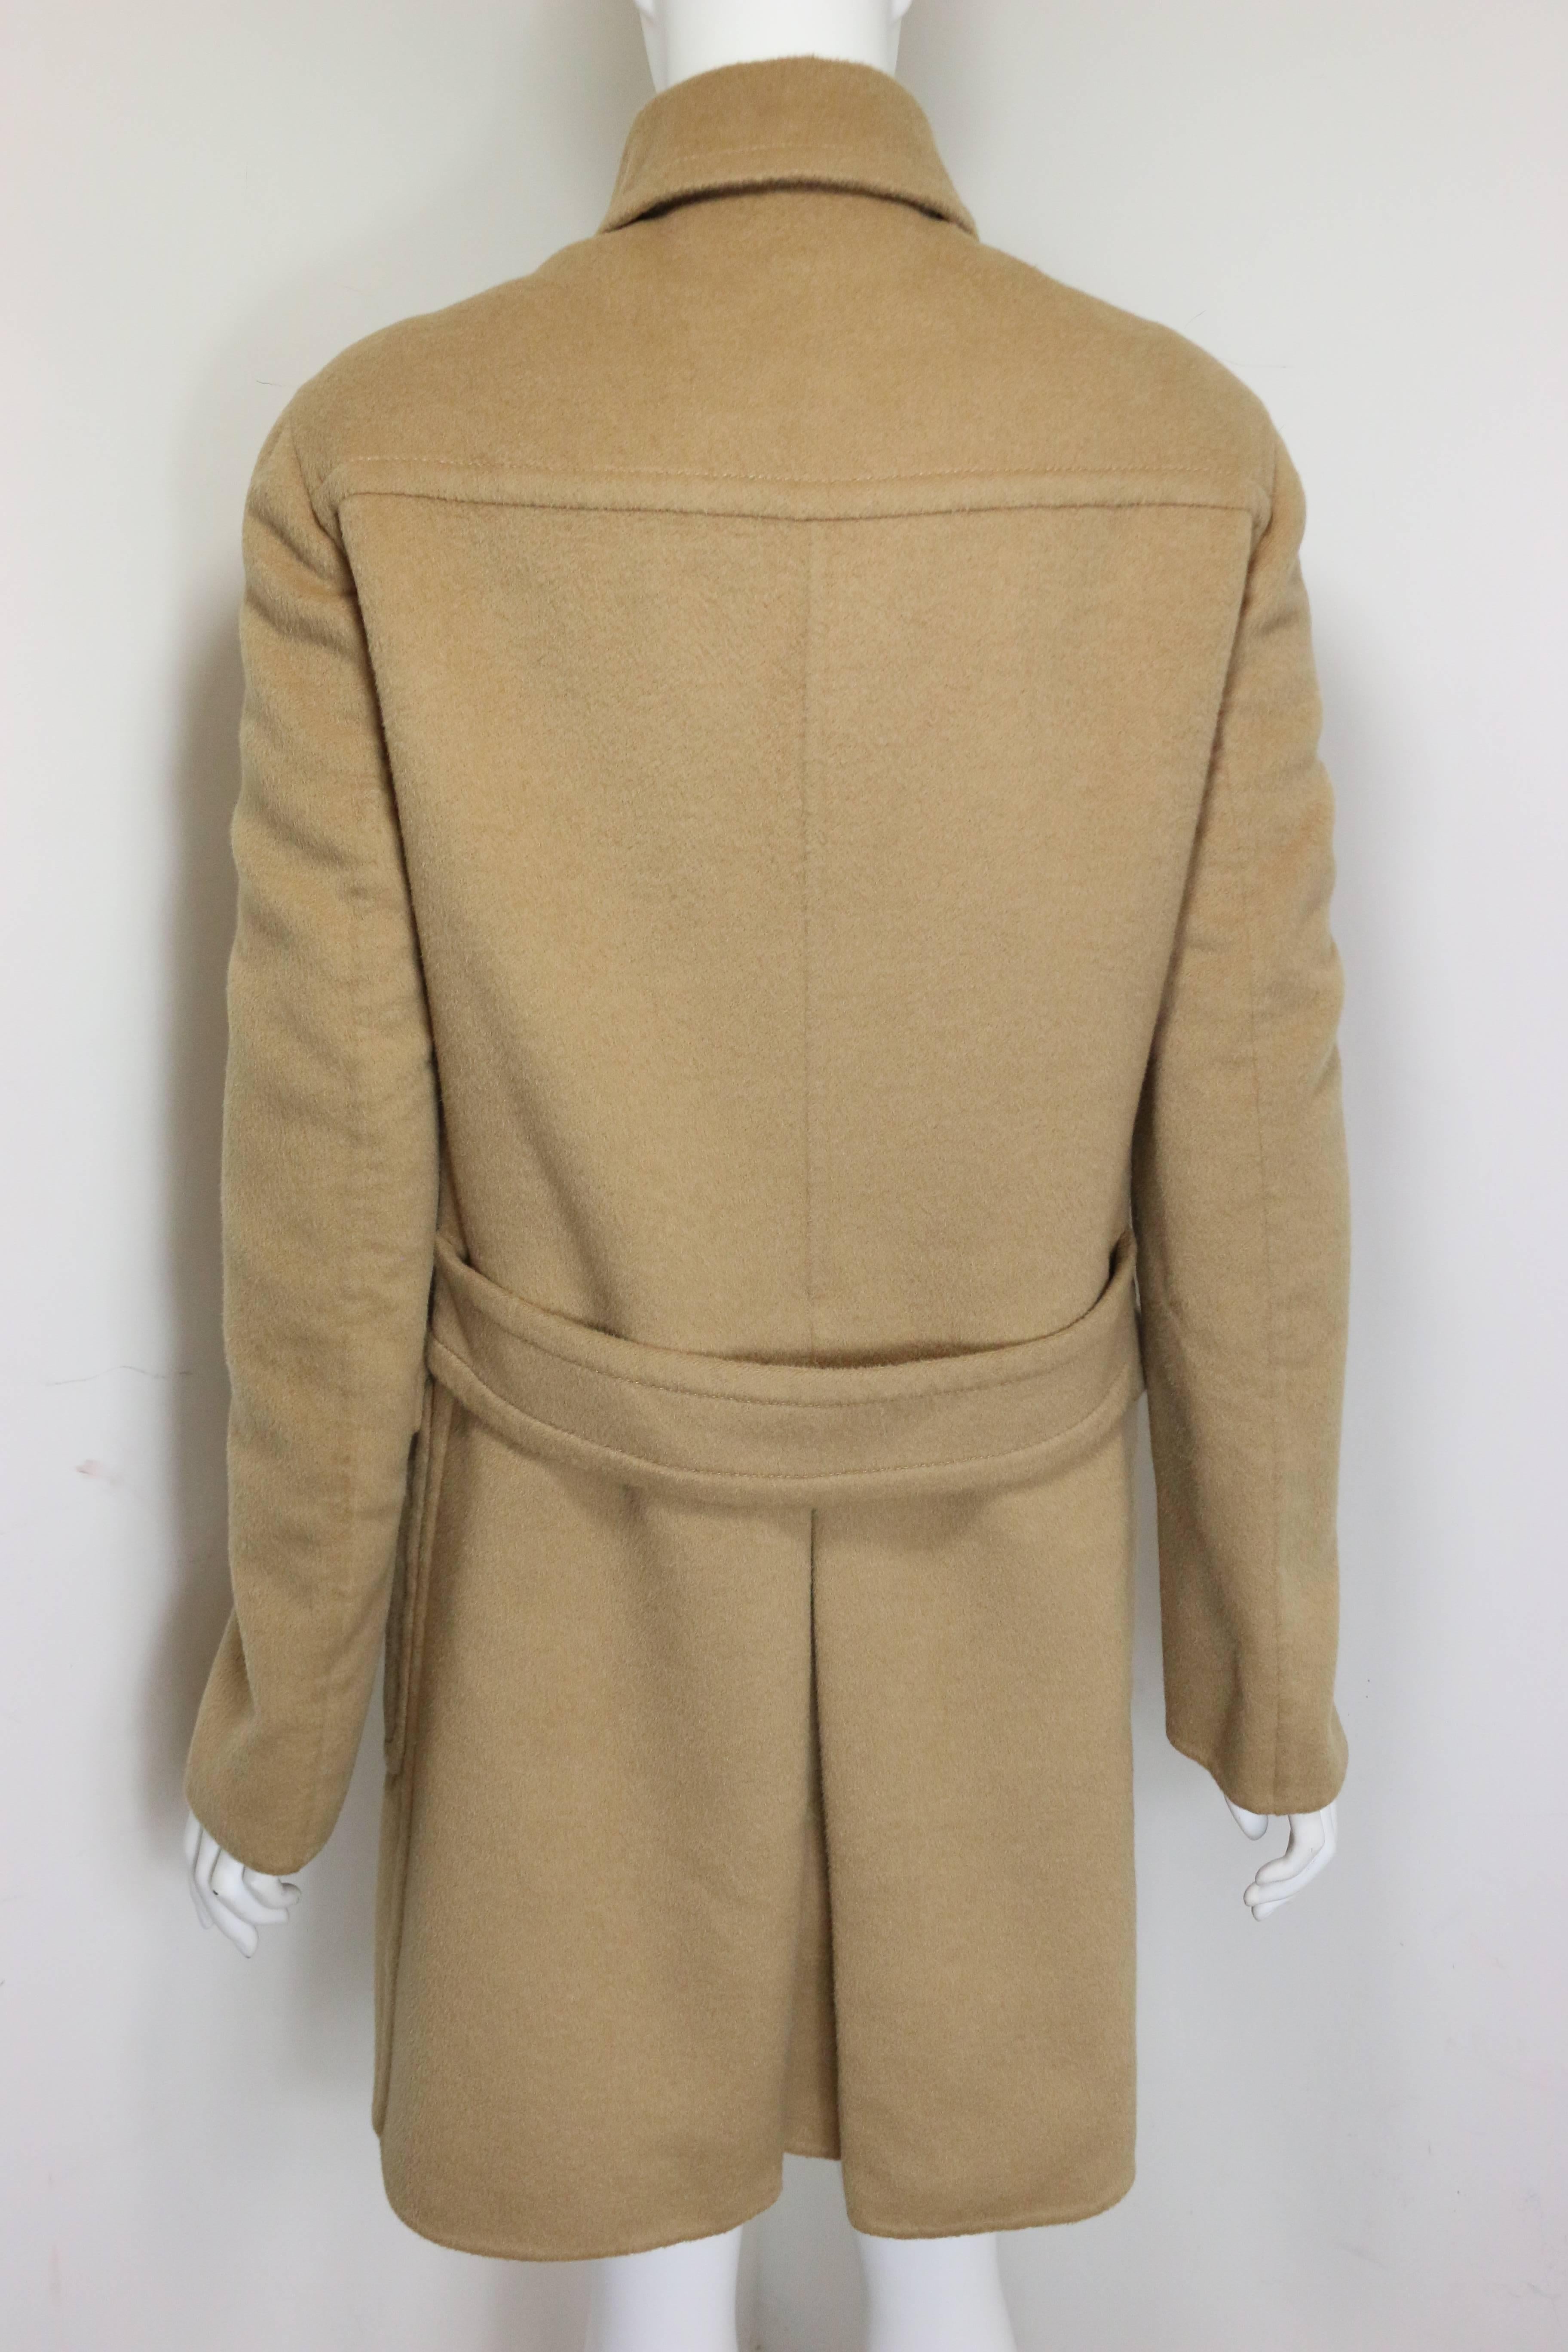 Prada Camel Wool Angora Goat Hair Double Breasted Coat  In Excellent Condition For Sale In Sheung Wan, HK